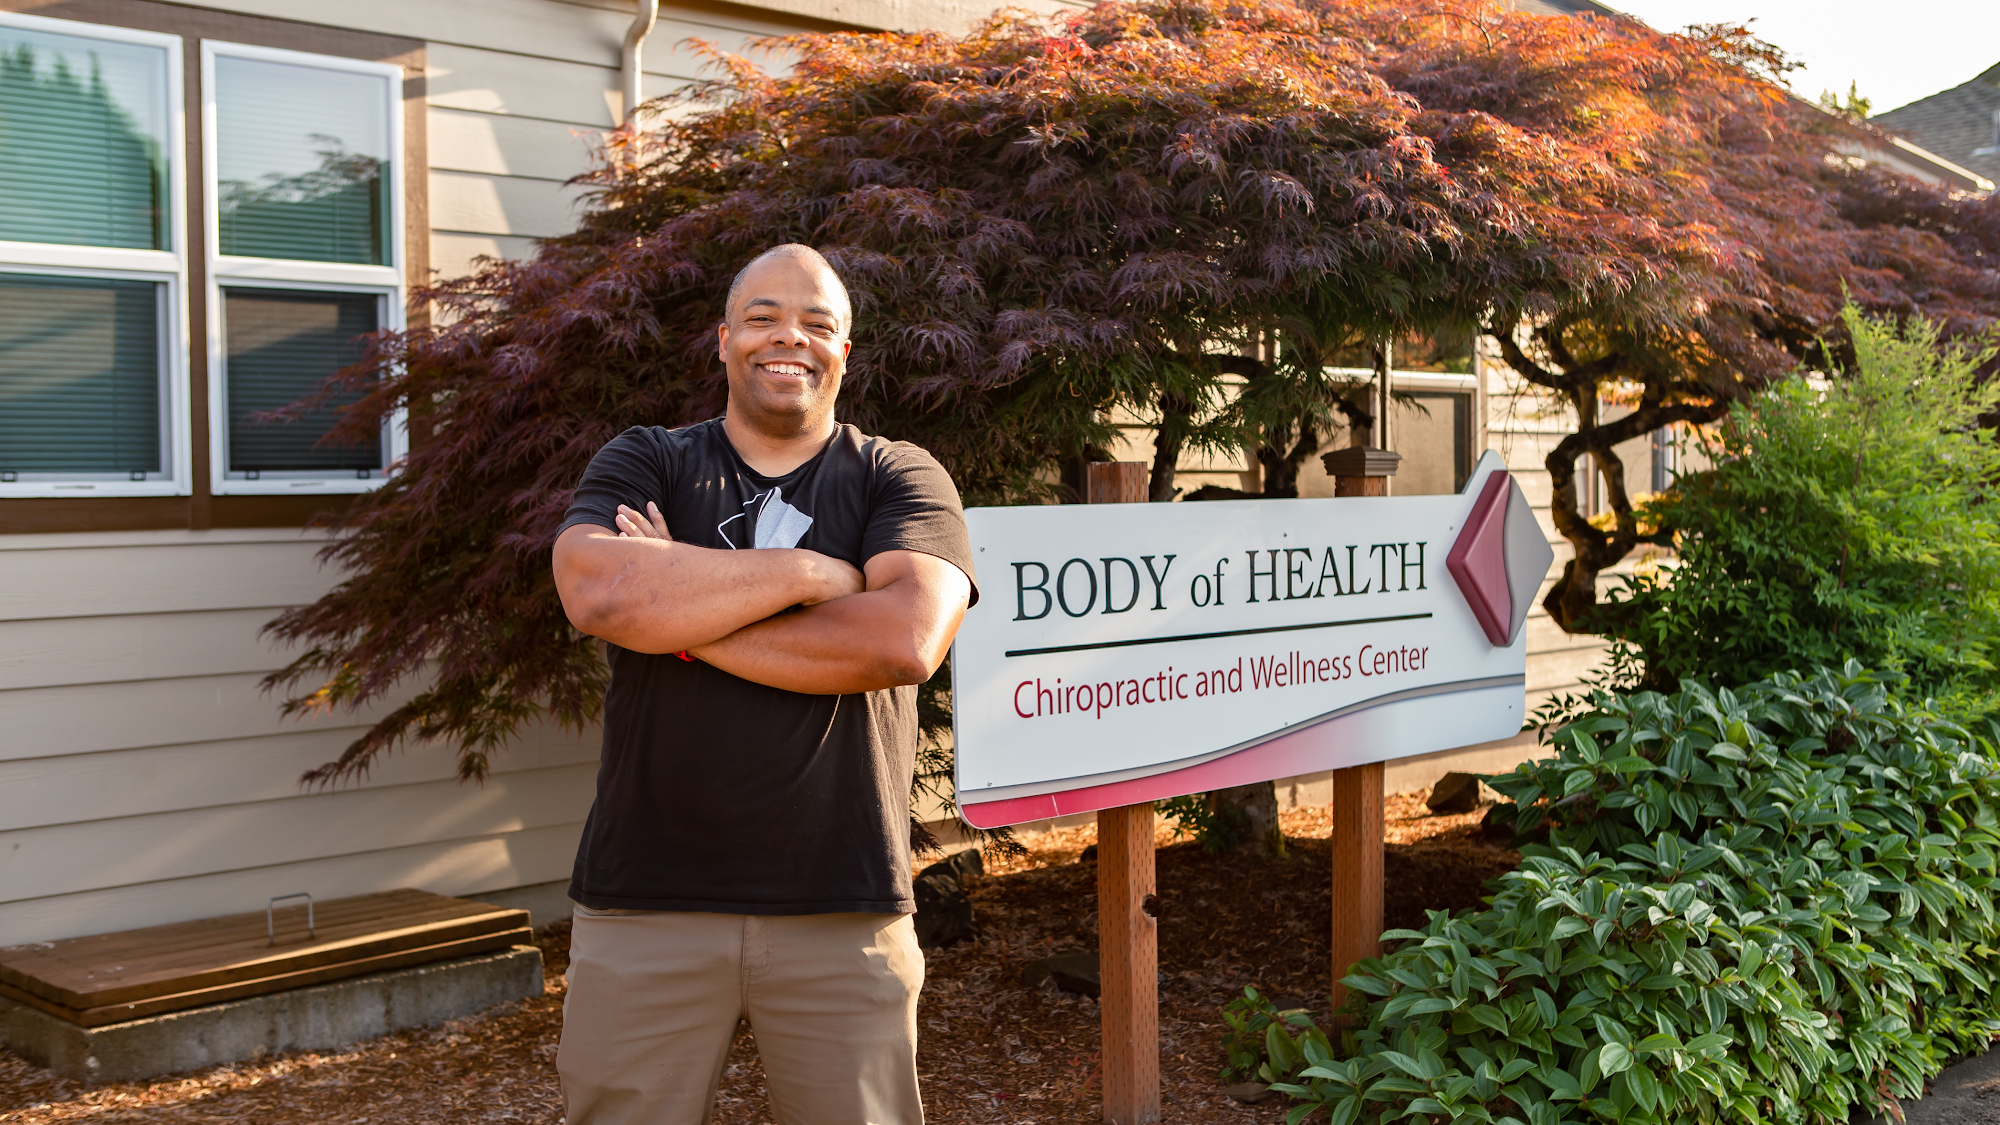 Body of Health Chiropractic and Wellness Center